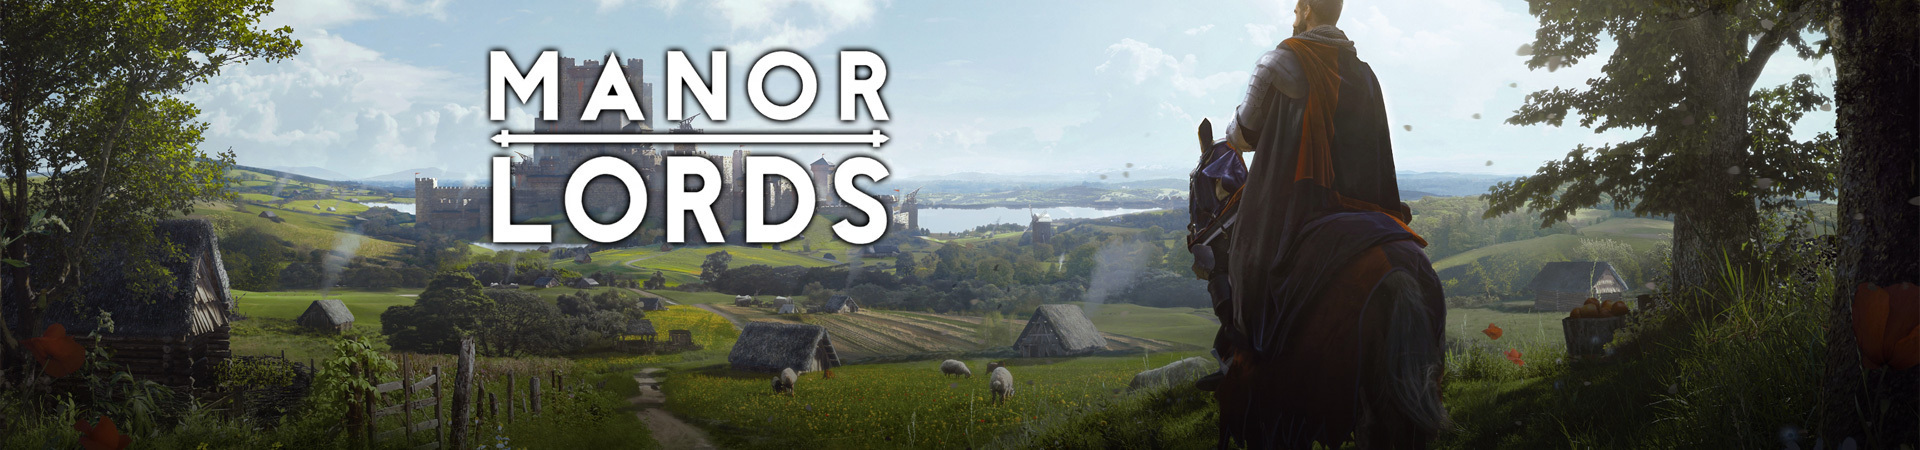 Manor Lords - <b><img class="img-dk "  src="/images/icon-serialfor-steam.png" width="" height="" title="Buyers receive a key for Steam to redeem, install &amp; play" /><img class="img-lt "  src="/images/icon-serialfor-steam-lt.png" width="" height="" title="Buyers receive a key for Steam to redeem, install &amp; play" /></b><span> Now available</span>